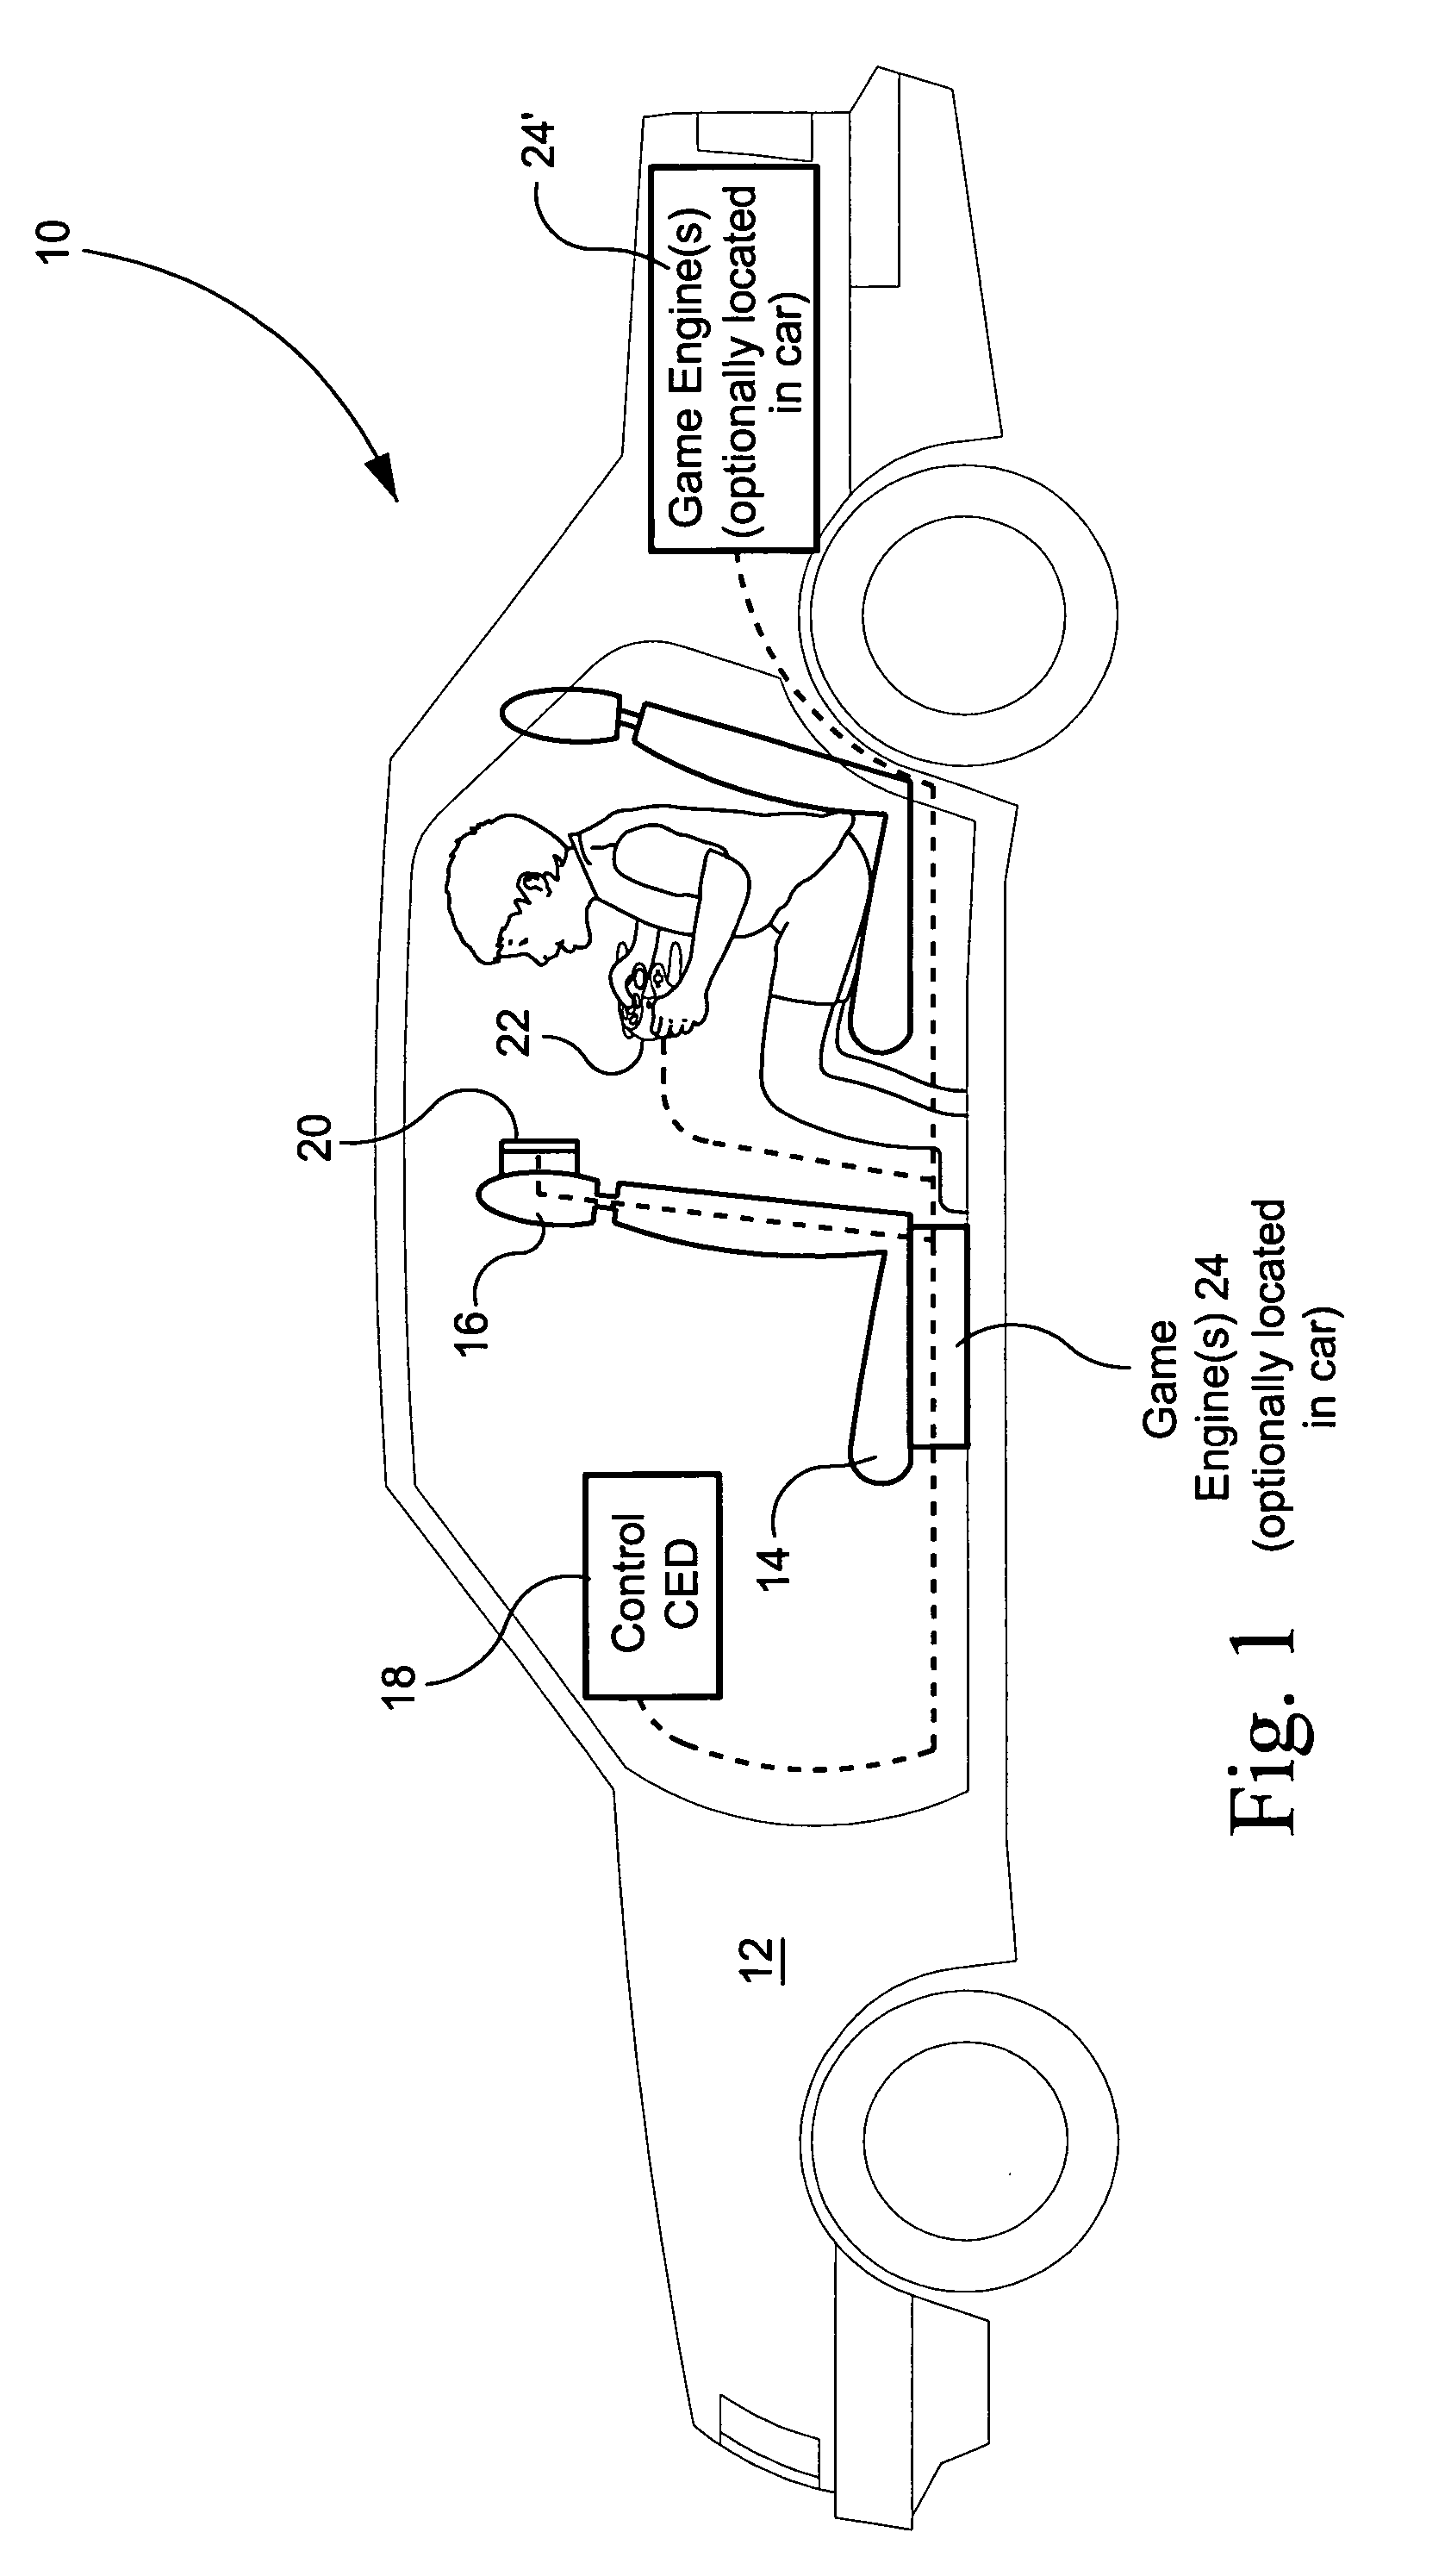 Car-based entertainment system with video gaming